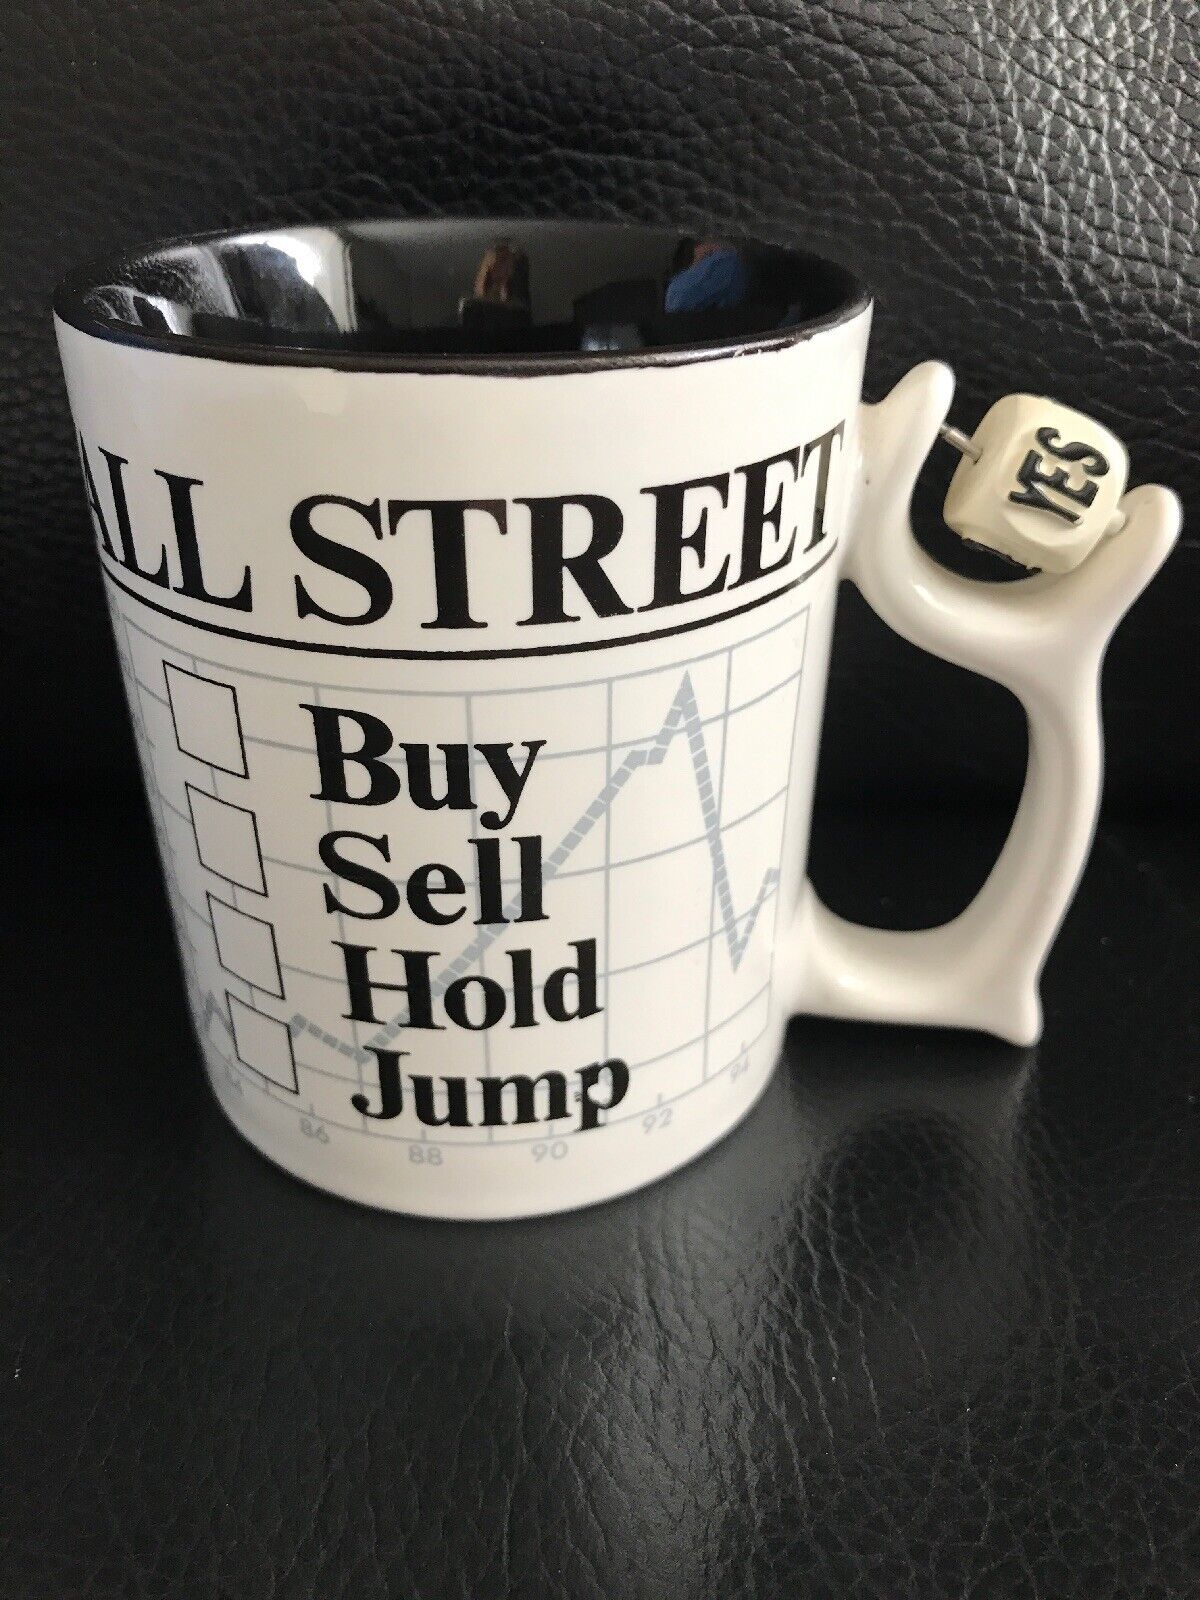 Dept 56 Wall Street Stock Market Buy Sell Hold Jump Dice Spinner Coffee Mug Cup